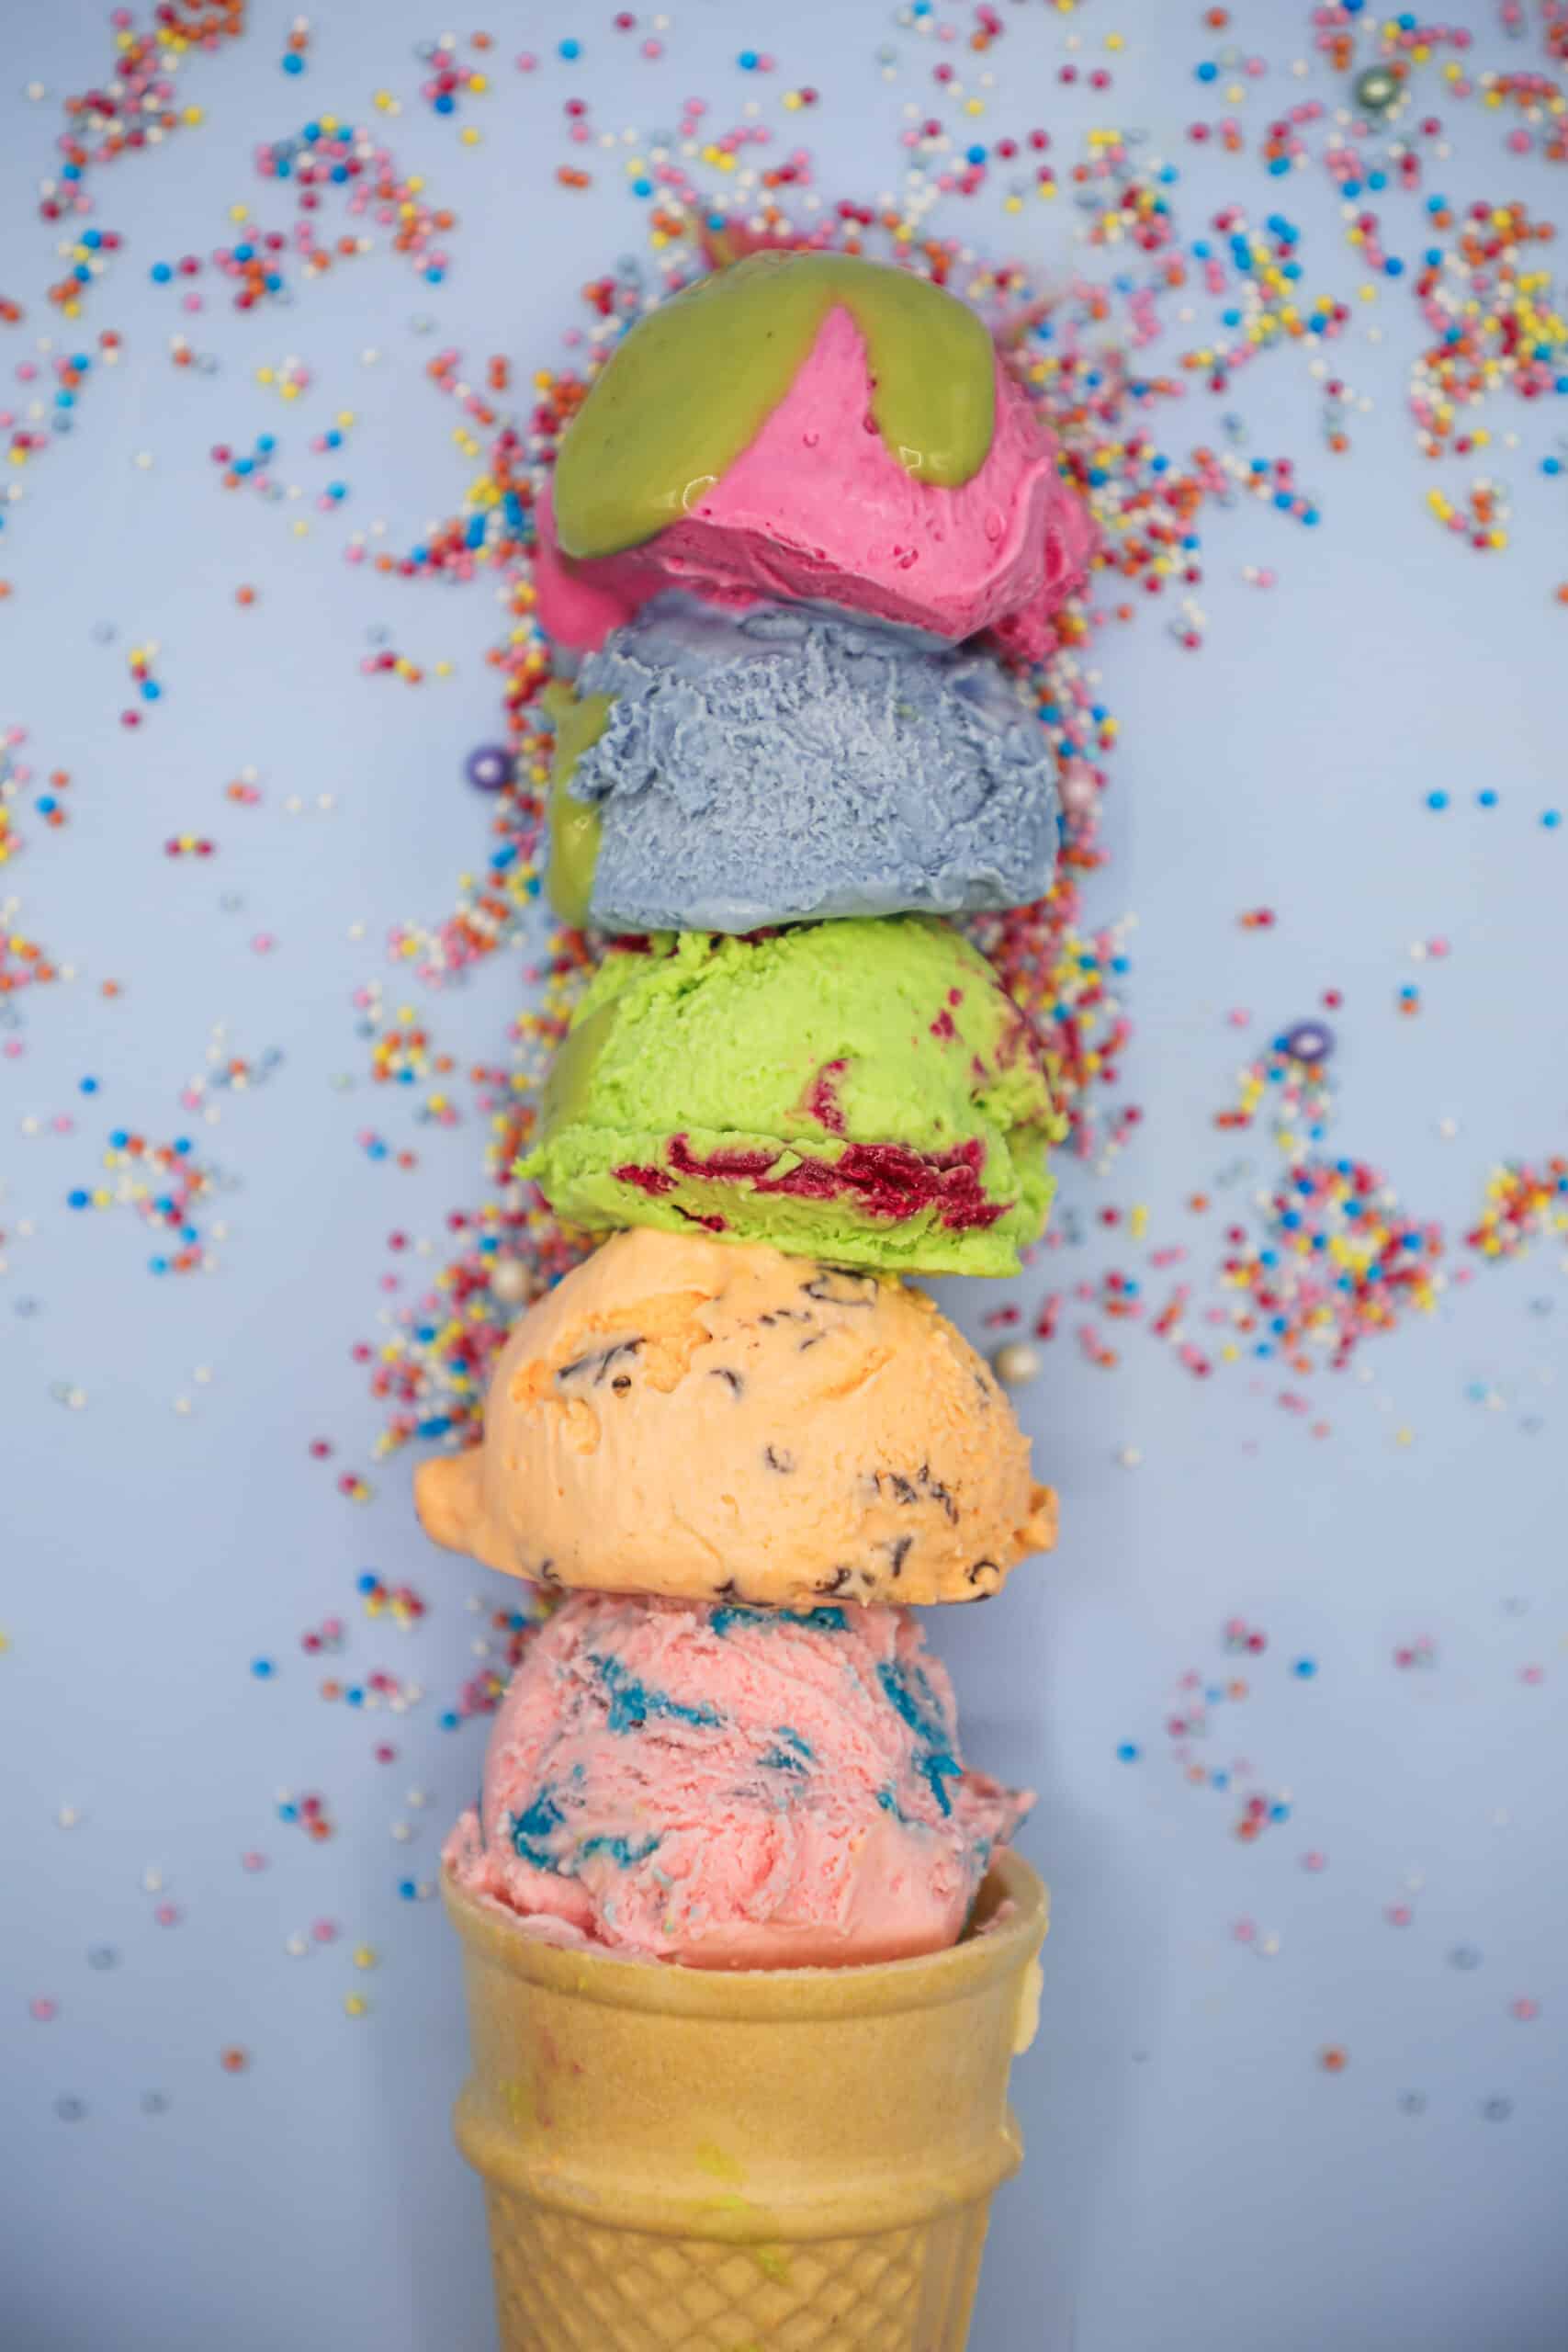 Pile of colorful flower sprinkles for cupcakes and ice-cream. Top